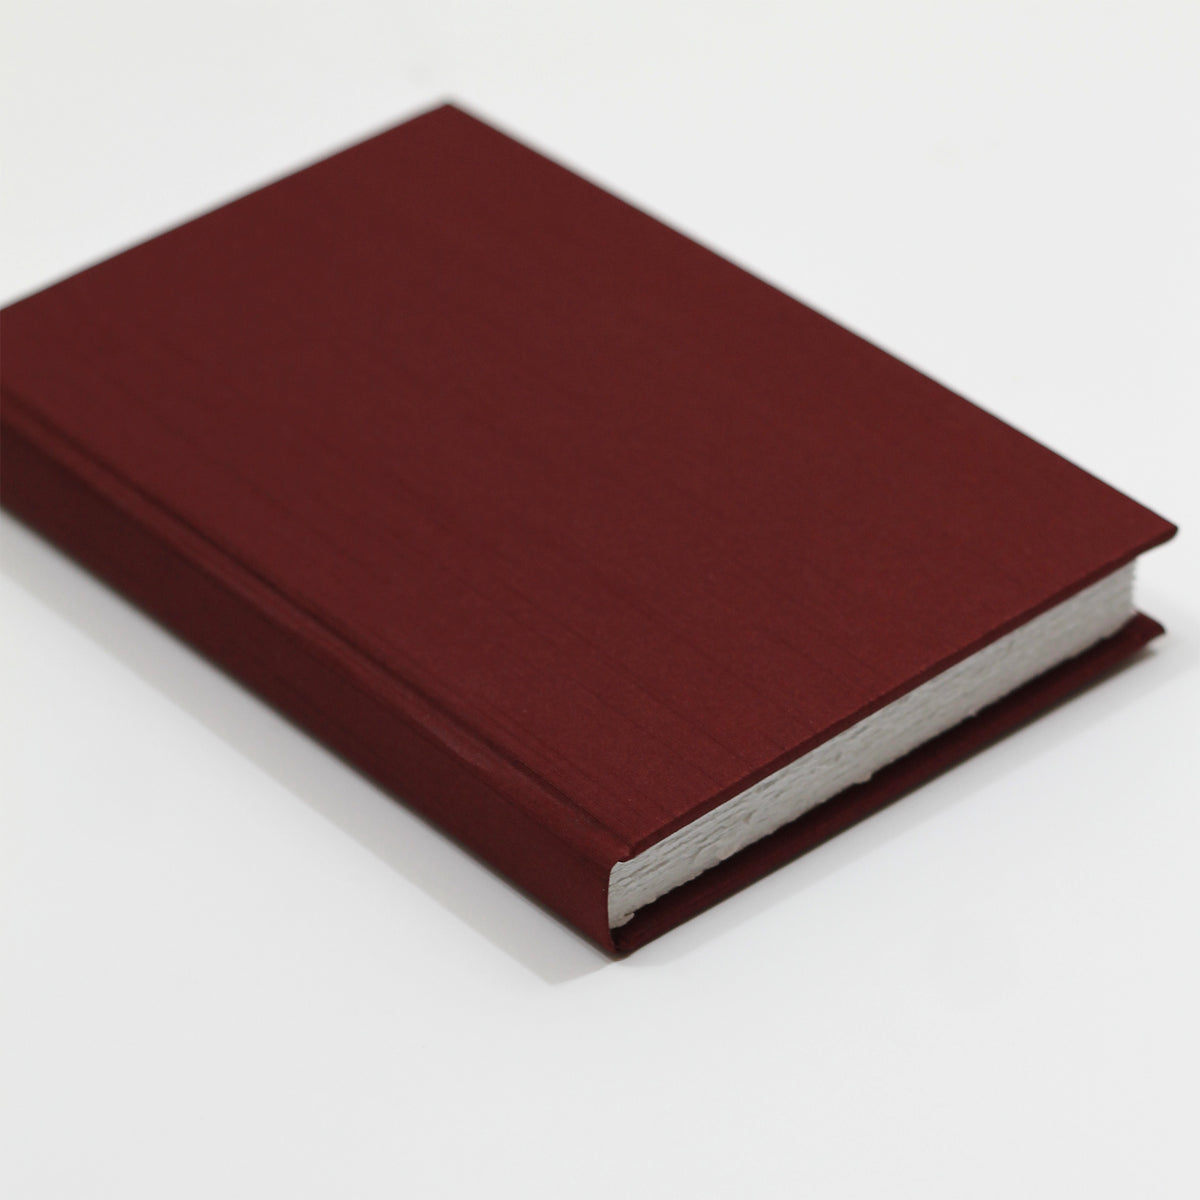 Medium 5.5x8.5 Blank Page Journal | Cover: Garnet Silk | Available Personalized